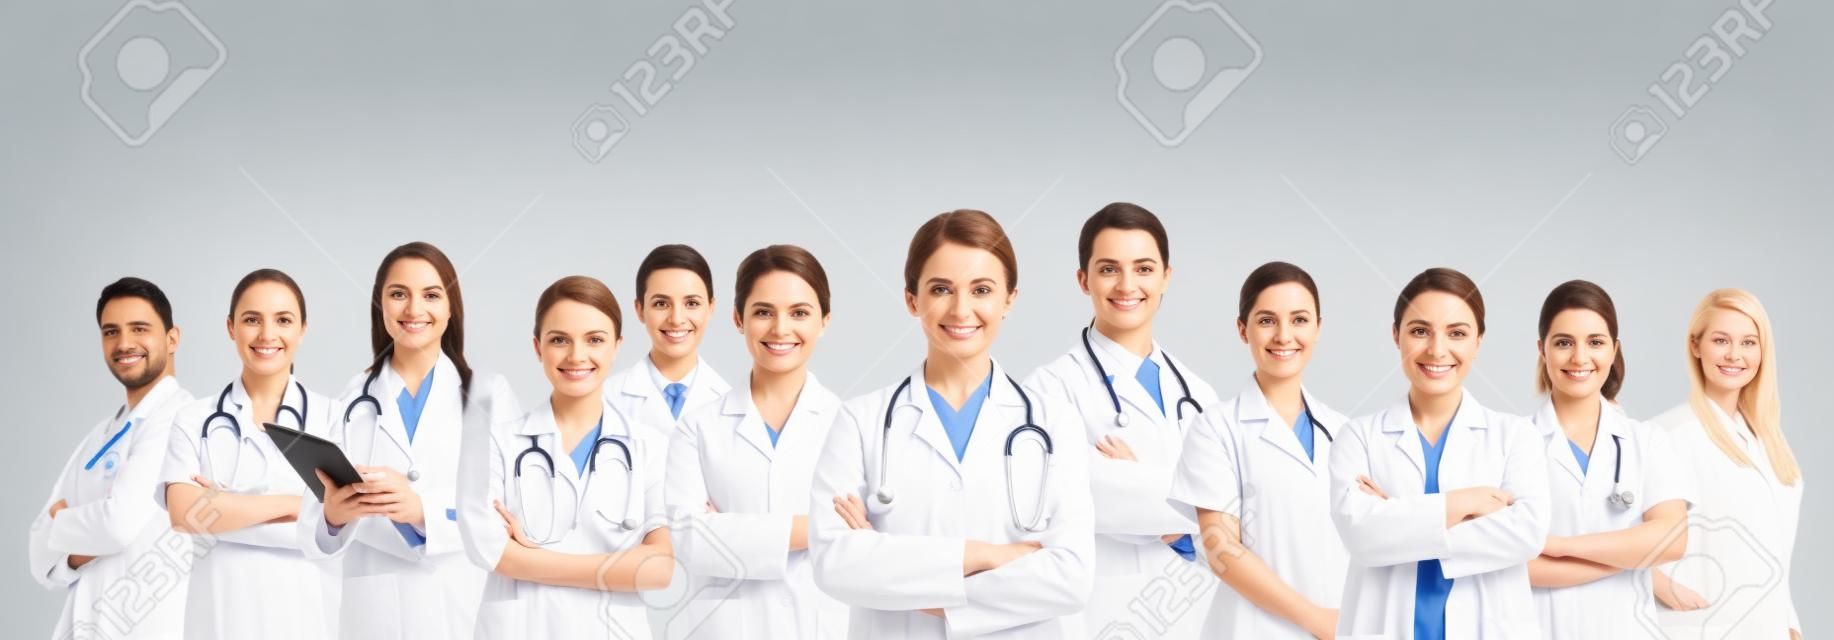 medicine and healthcare concept - team or group of doctors and nurses